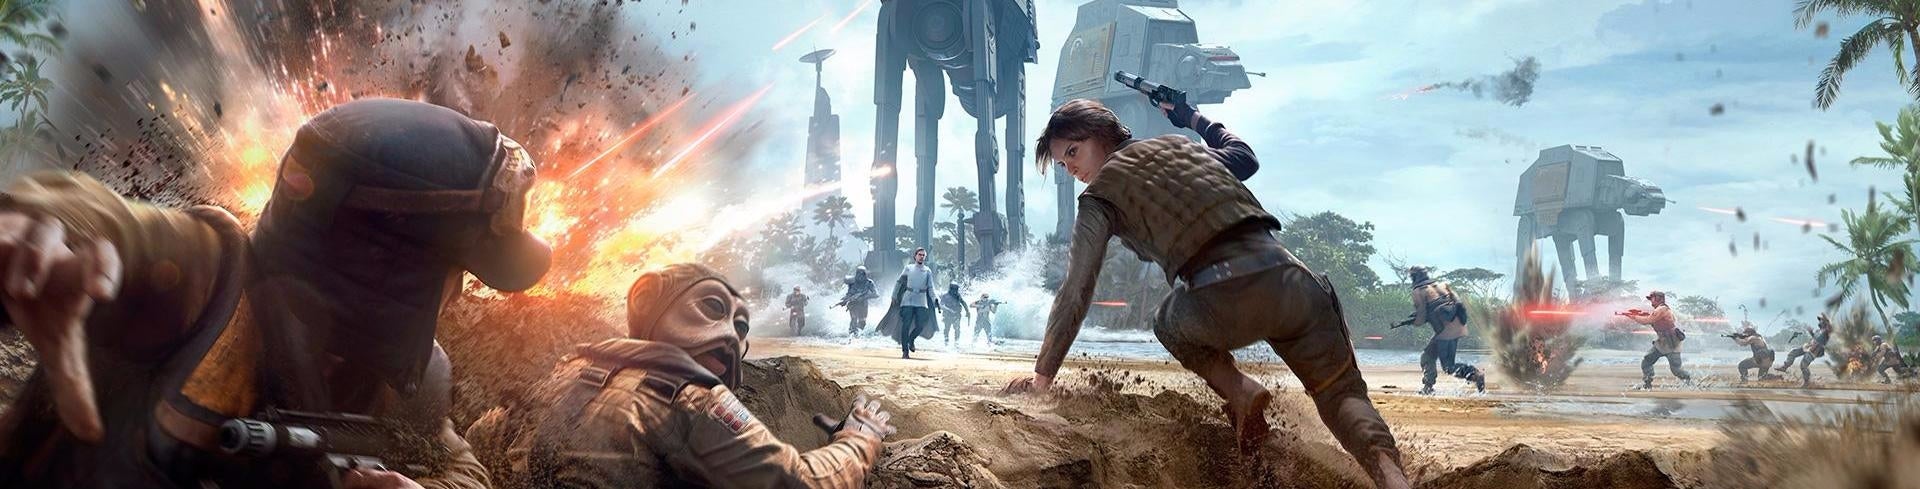 Image for Star Wars Battlefront's Rogue One DLC gives us some pointers towards next year's sequel